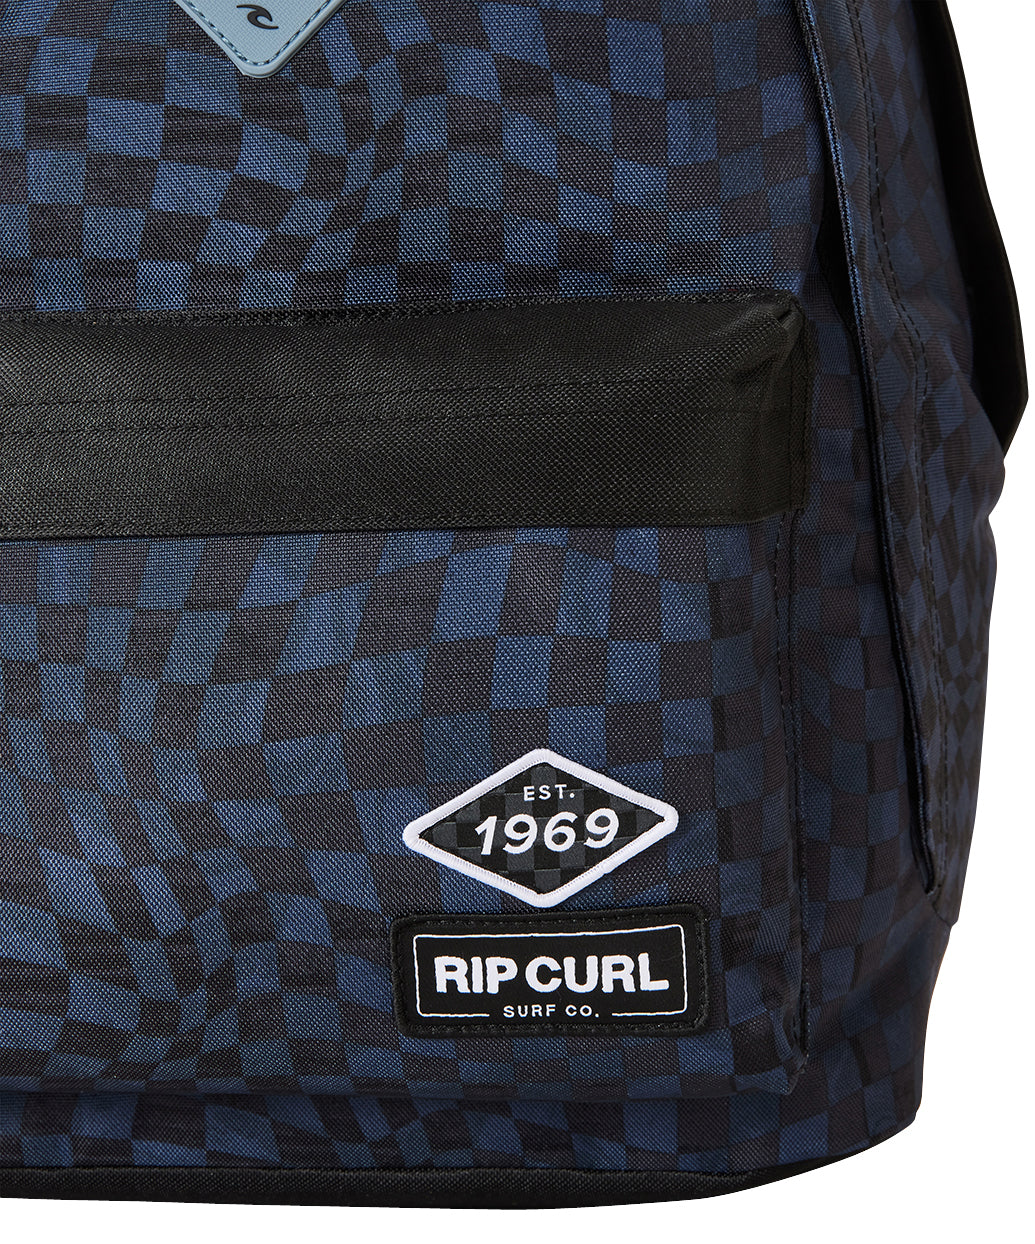 Rip Curle Double Dome 24L Backpack - Navy